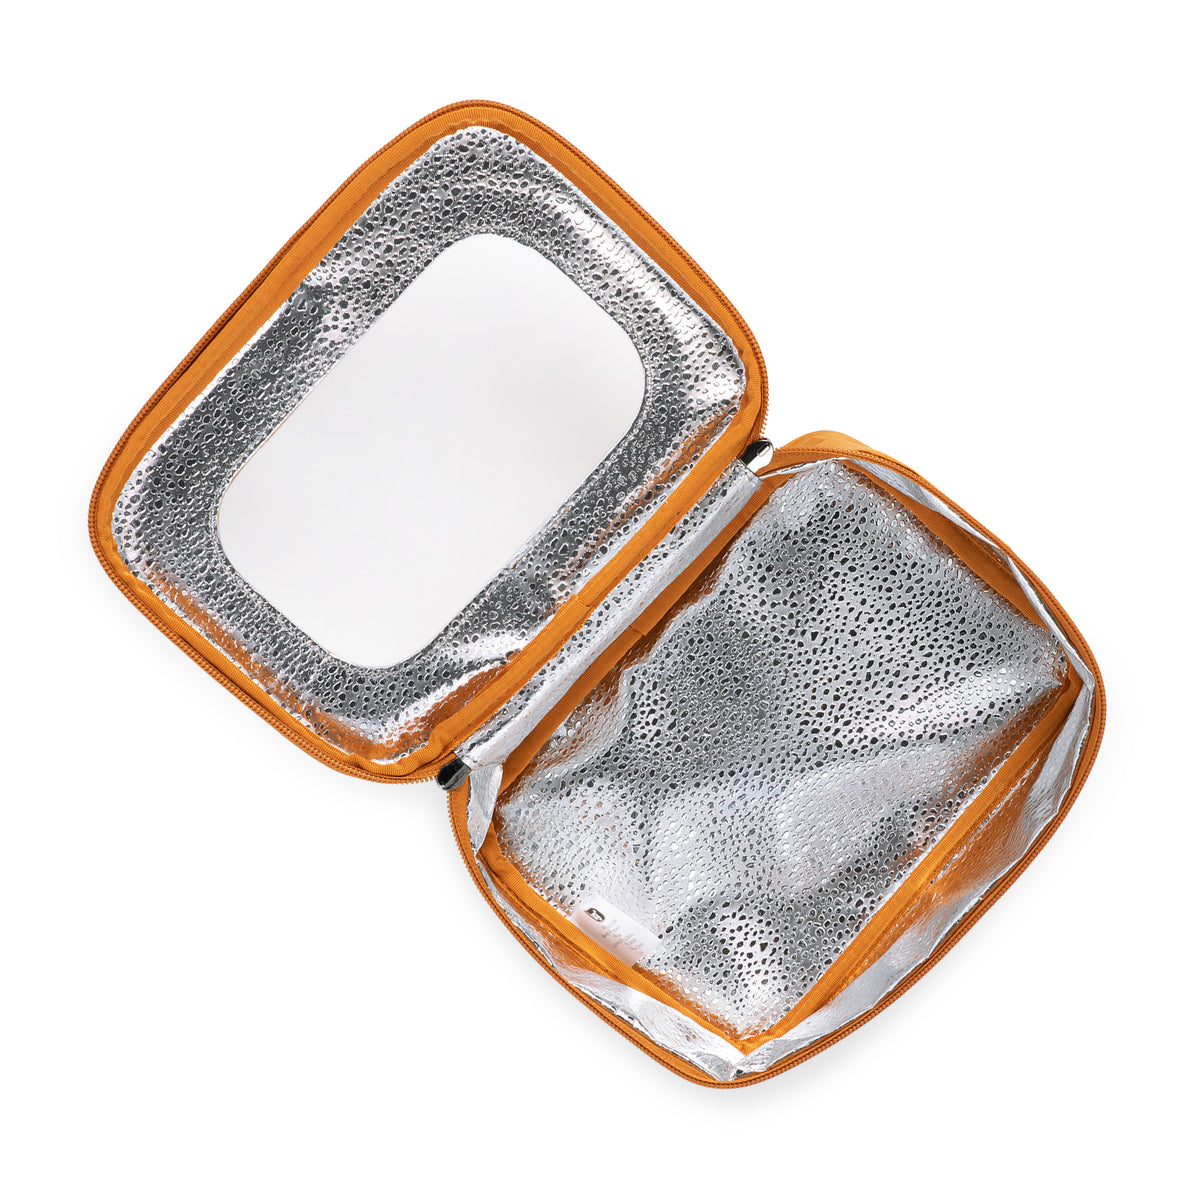 Bento Insulated Container